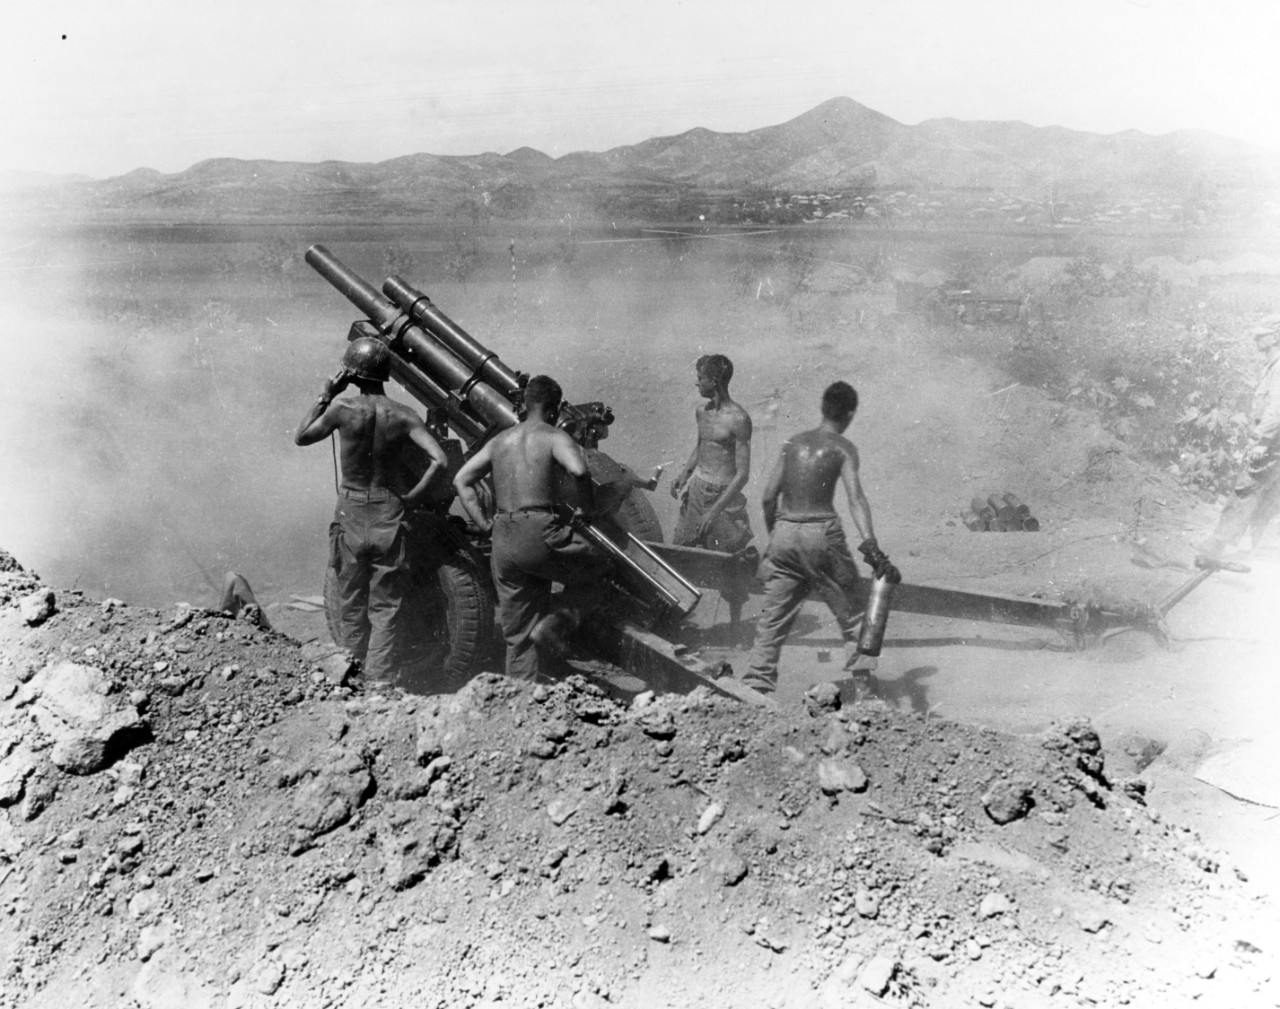 Gun crew of the 64th Field Artillery Battalion, 25th Infantry Division, fire a 105mm howitzer on North Korean positions near Uirson, South Korea, 27 August 1950. Photographed by PFC Wayne H. Weidner. Photograph from the Army Signal Corps Collection in the U.S. National Archives. (SC 347107)